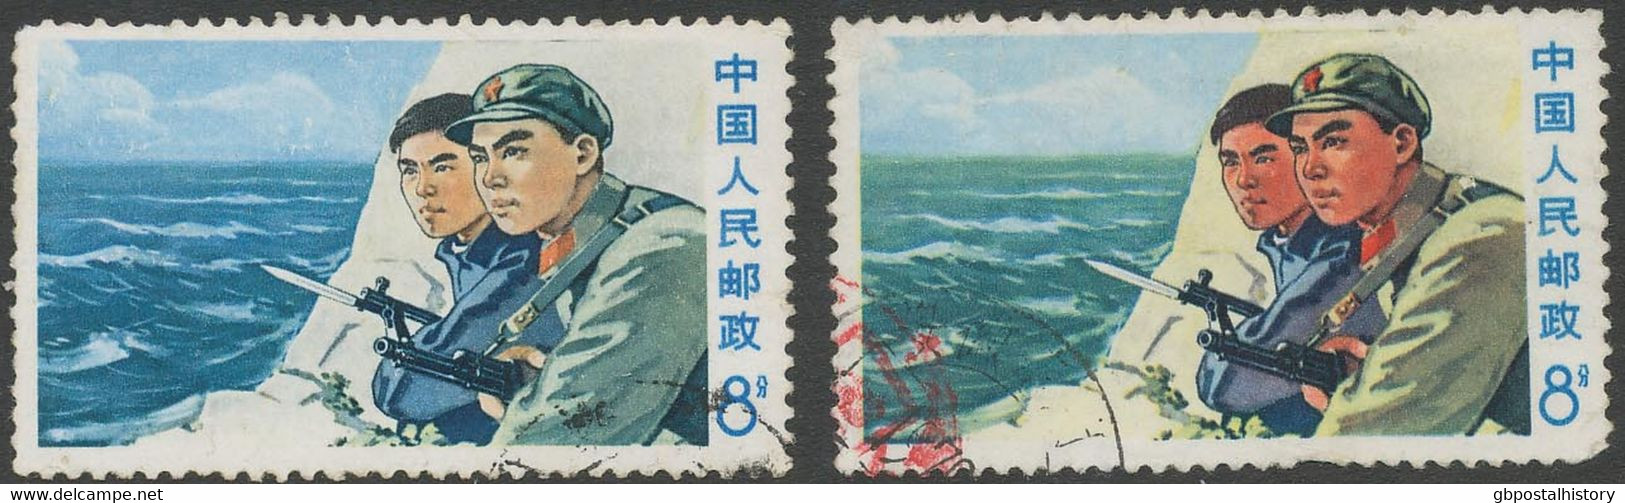 PEOPLES REPUBLIC OF CHINA 1969 Guarding The Coast 8 F. Fine Used Usual Perforation, MAJOR VARIETY: Missing Color Yellow - Usati